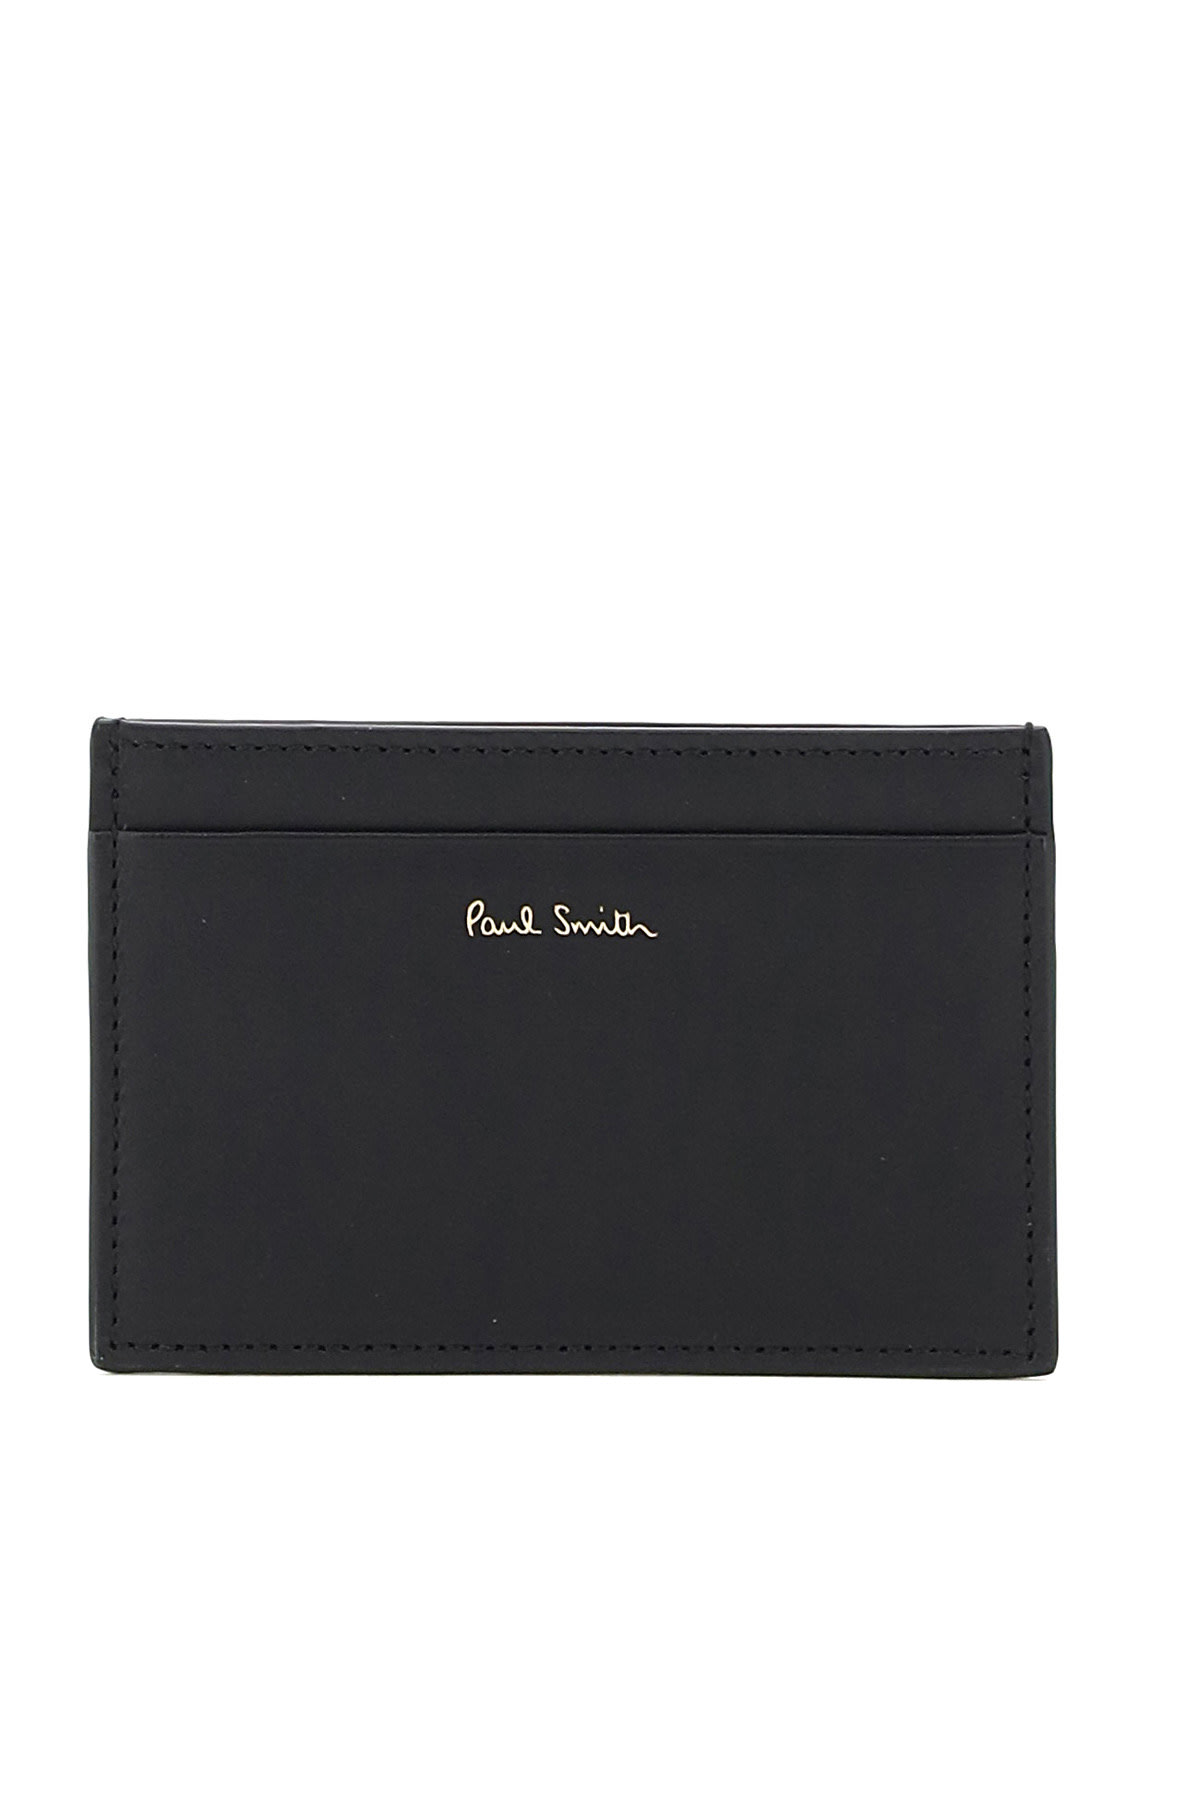 Paul Smith Striped Card Holder